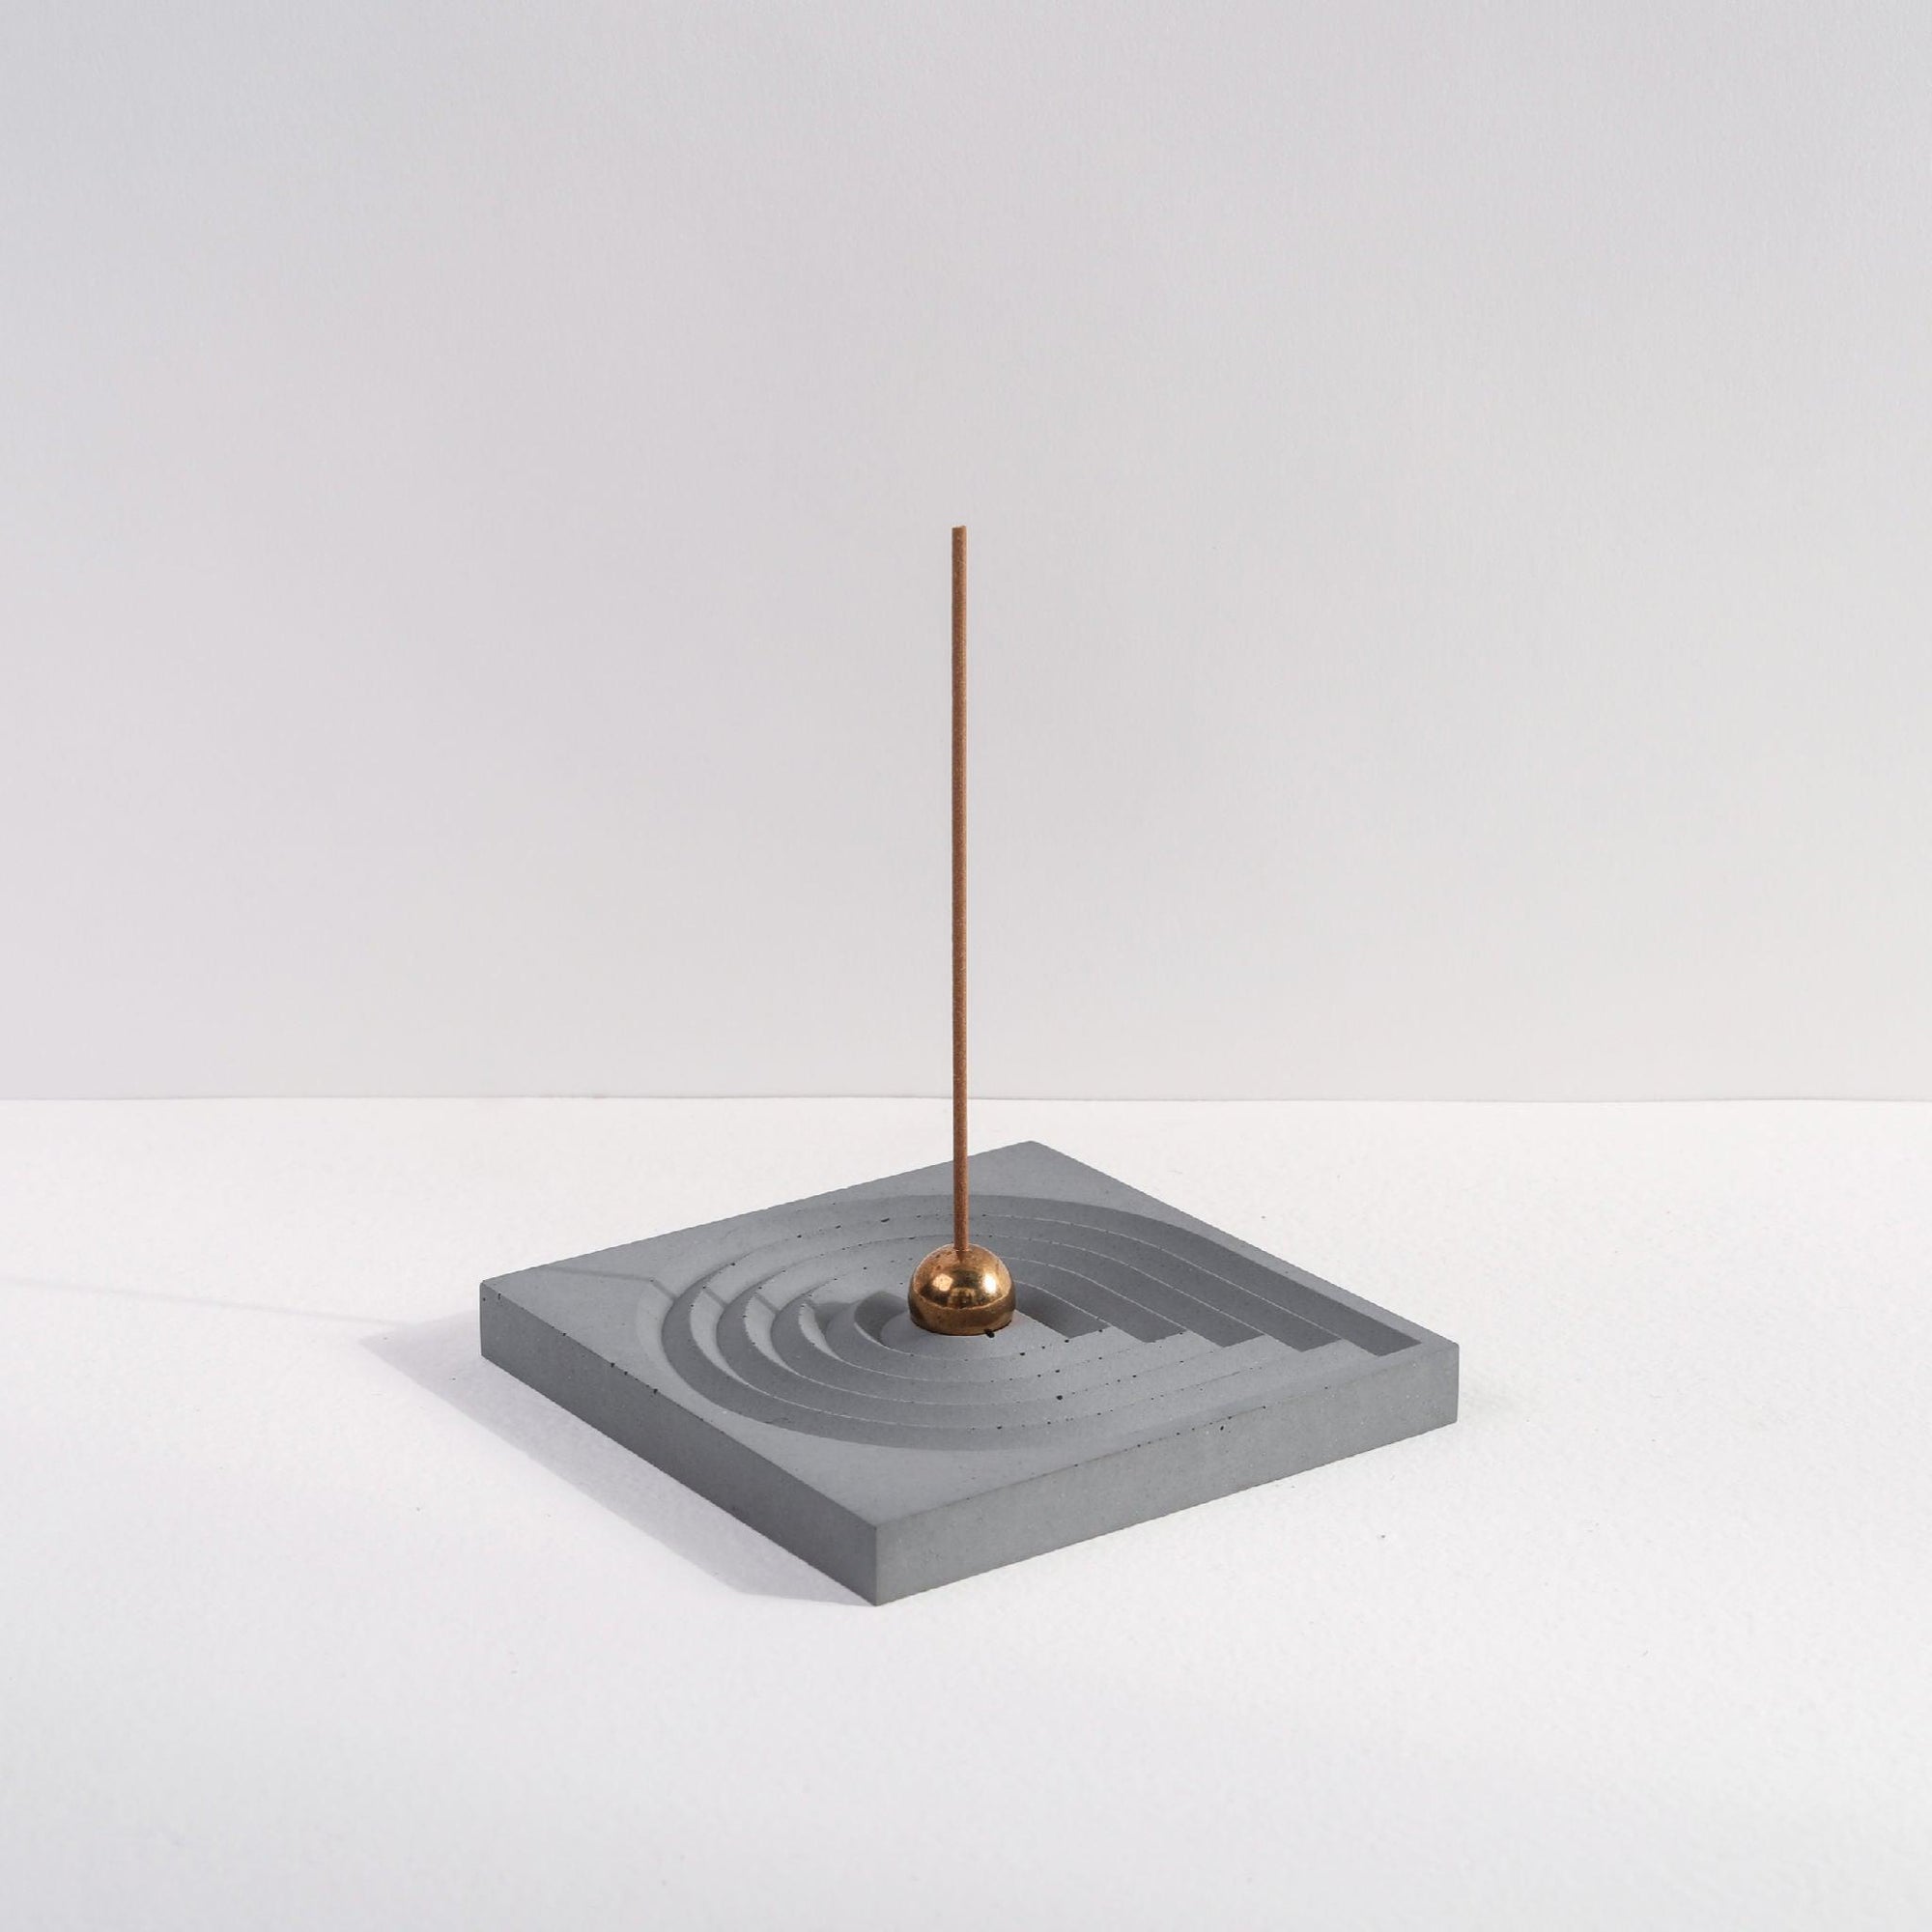 Individual View of Ridge Loop Incense Holder from Gift Set by Kin Objects